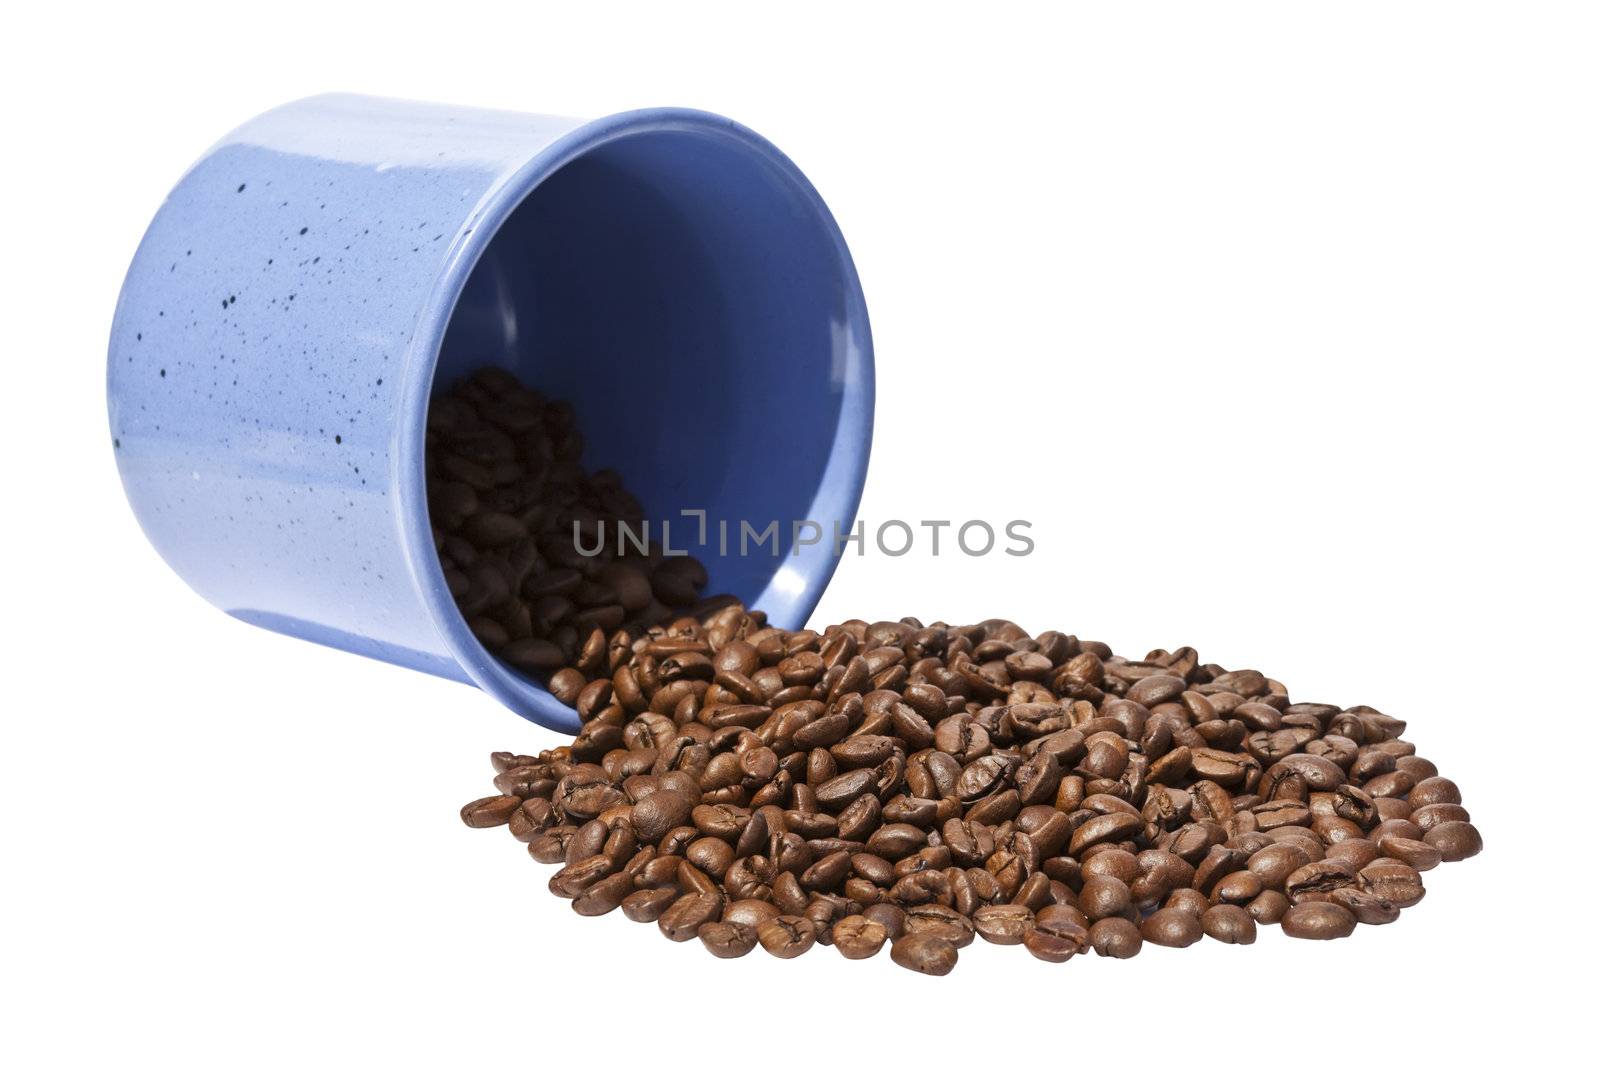 This image shows coffee bean with a cup